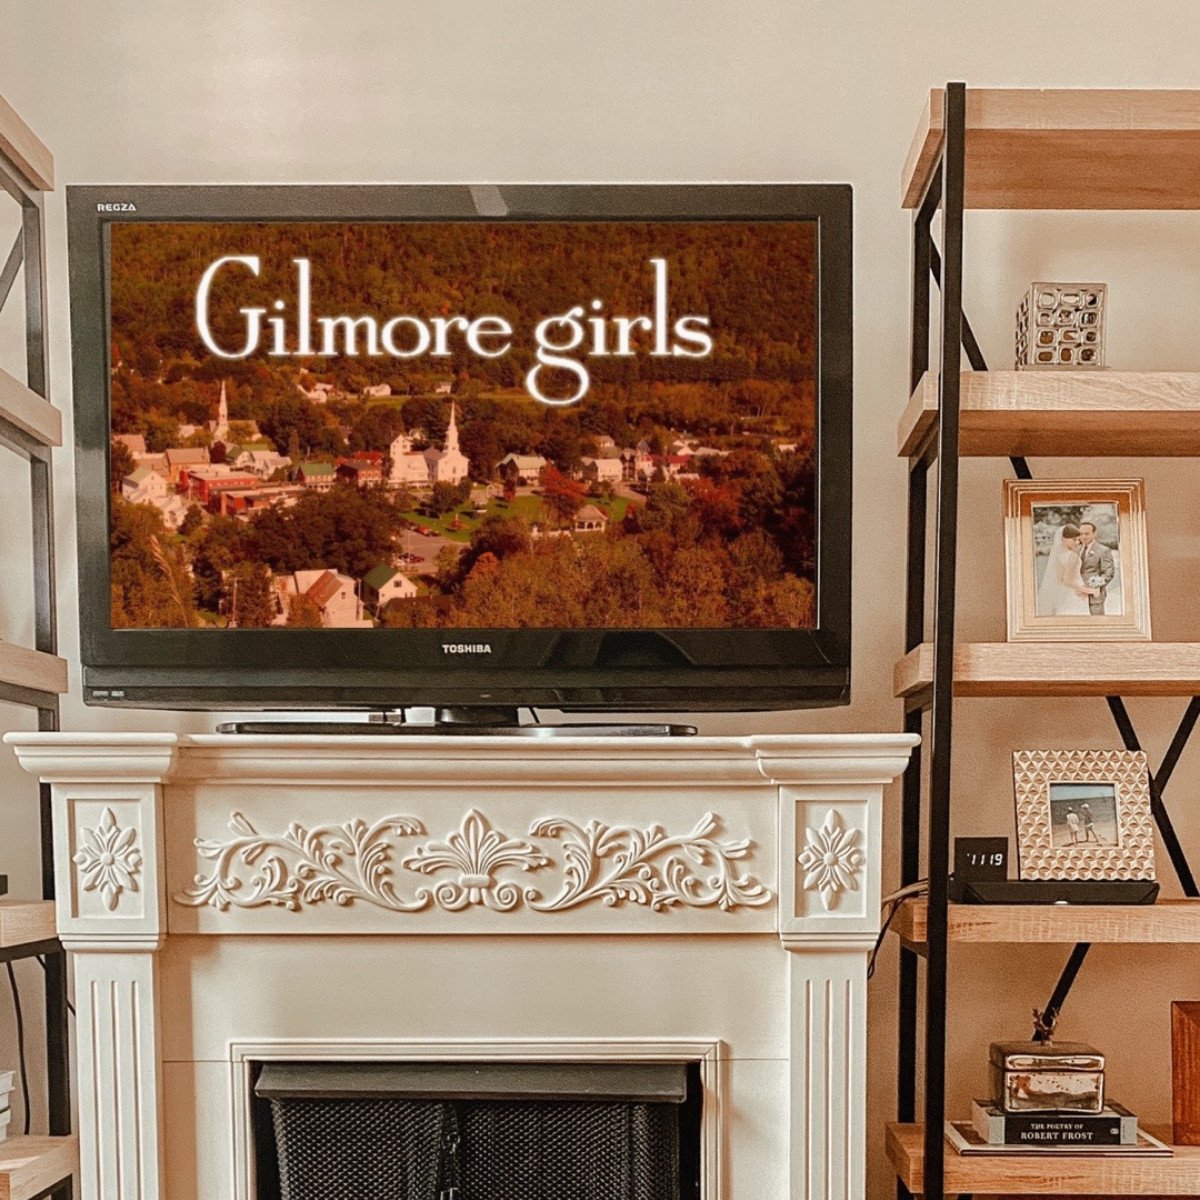 About Gilmore Girls: The Top 20 Reasons to Watch Now